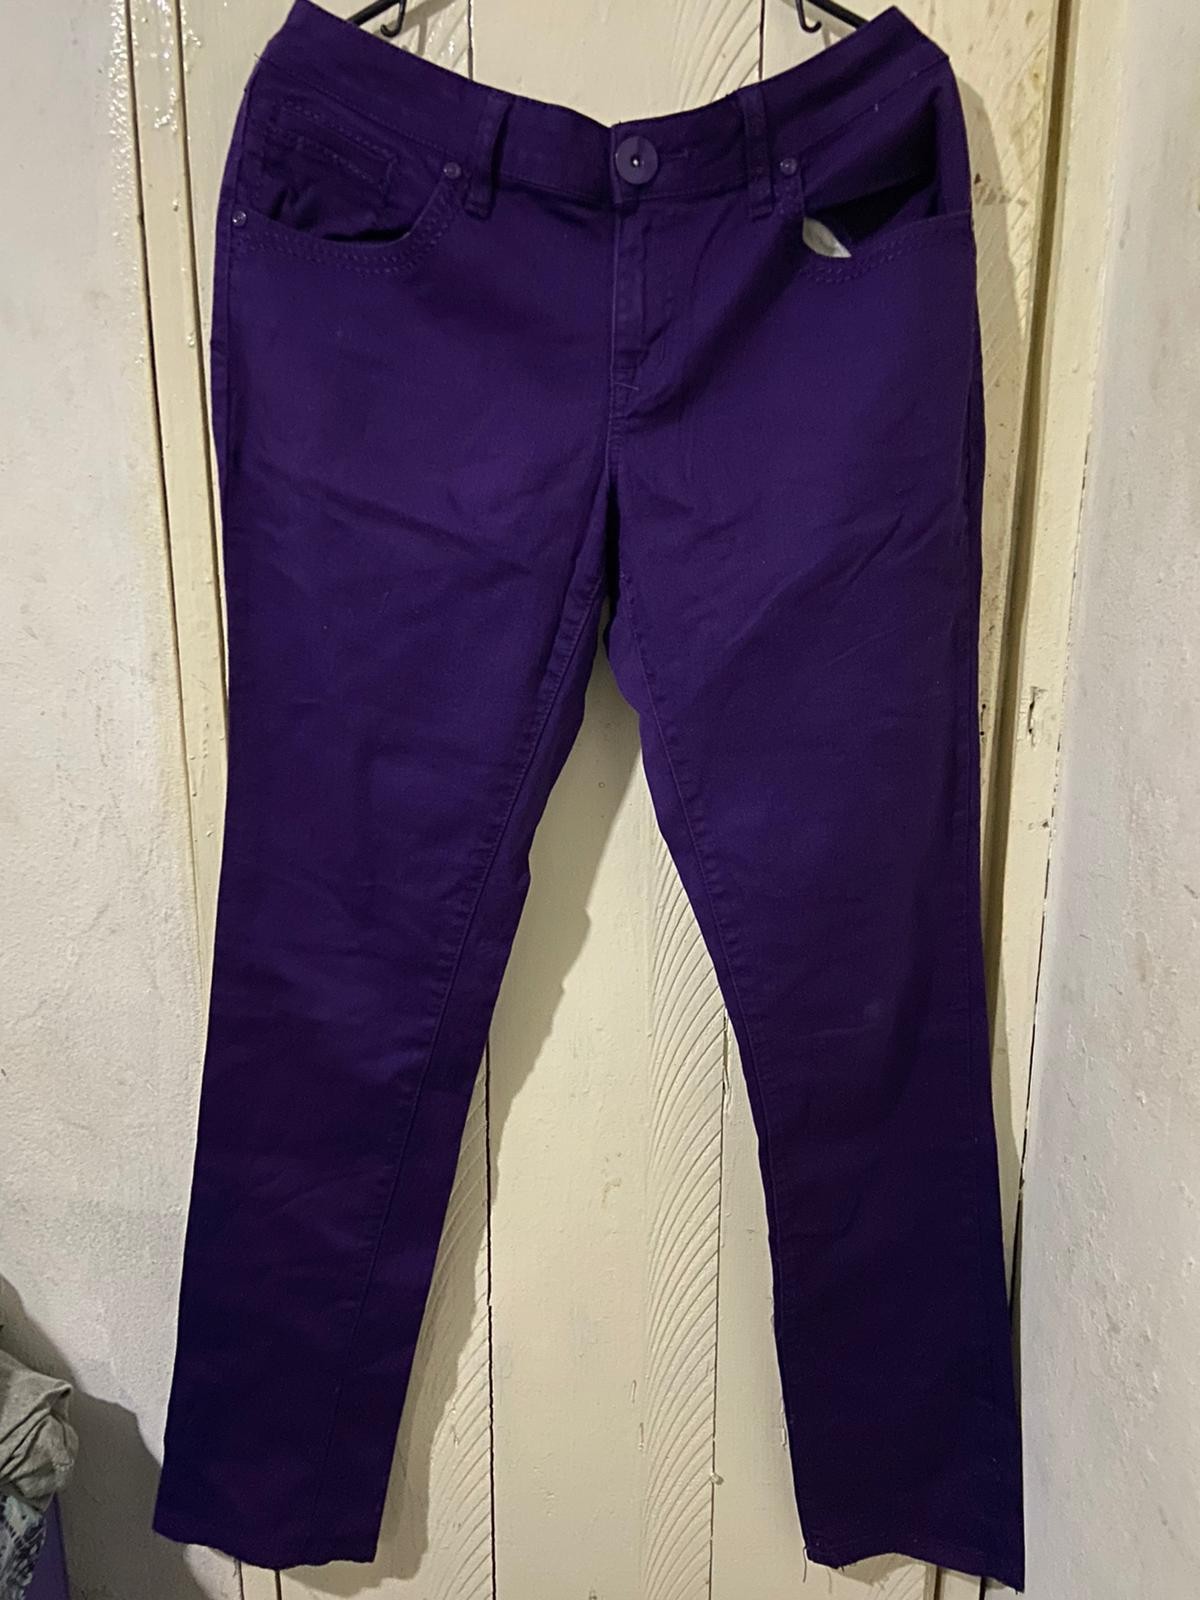 Purple Jeans Pants With Zip Back Pockets Size 15 for sale in Old ...